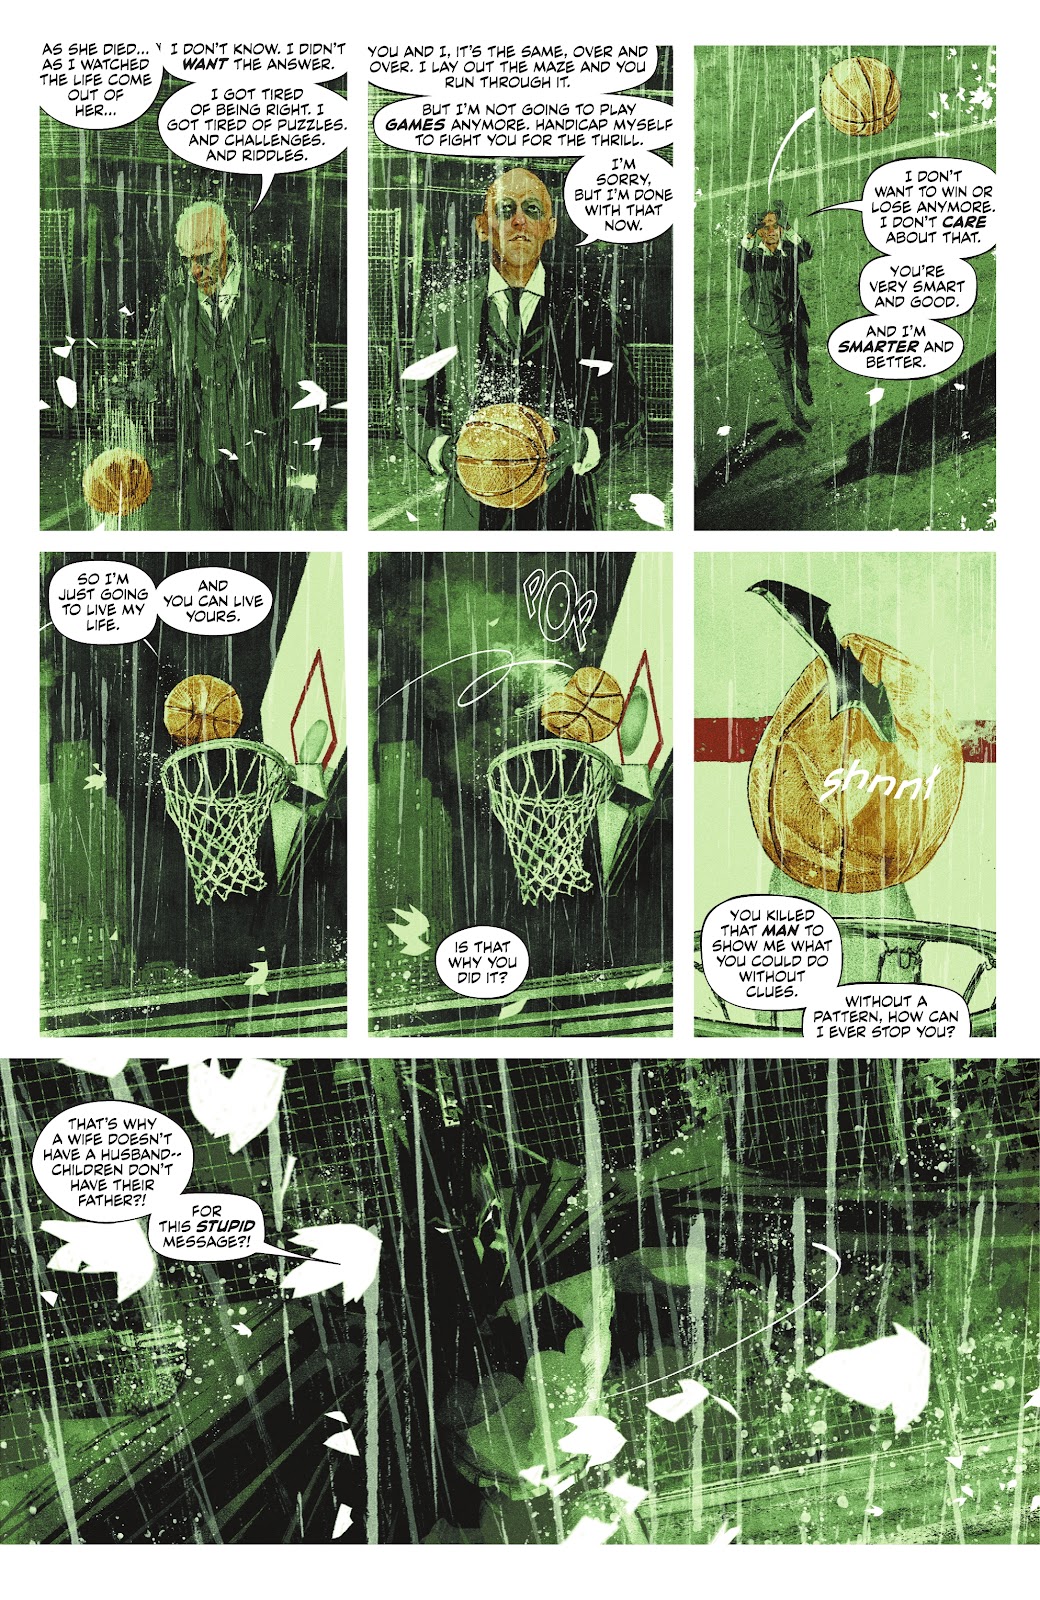 Batman: One Bad Day - The Riddler issue 1 - Page 57